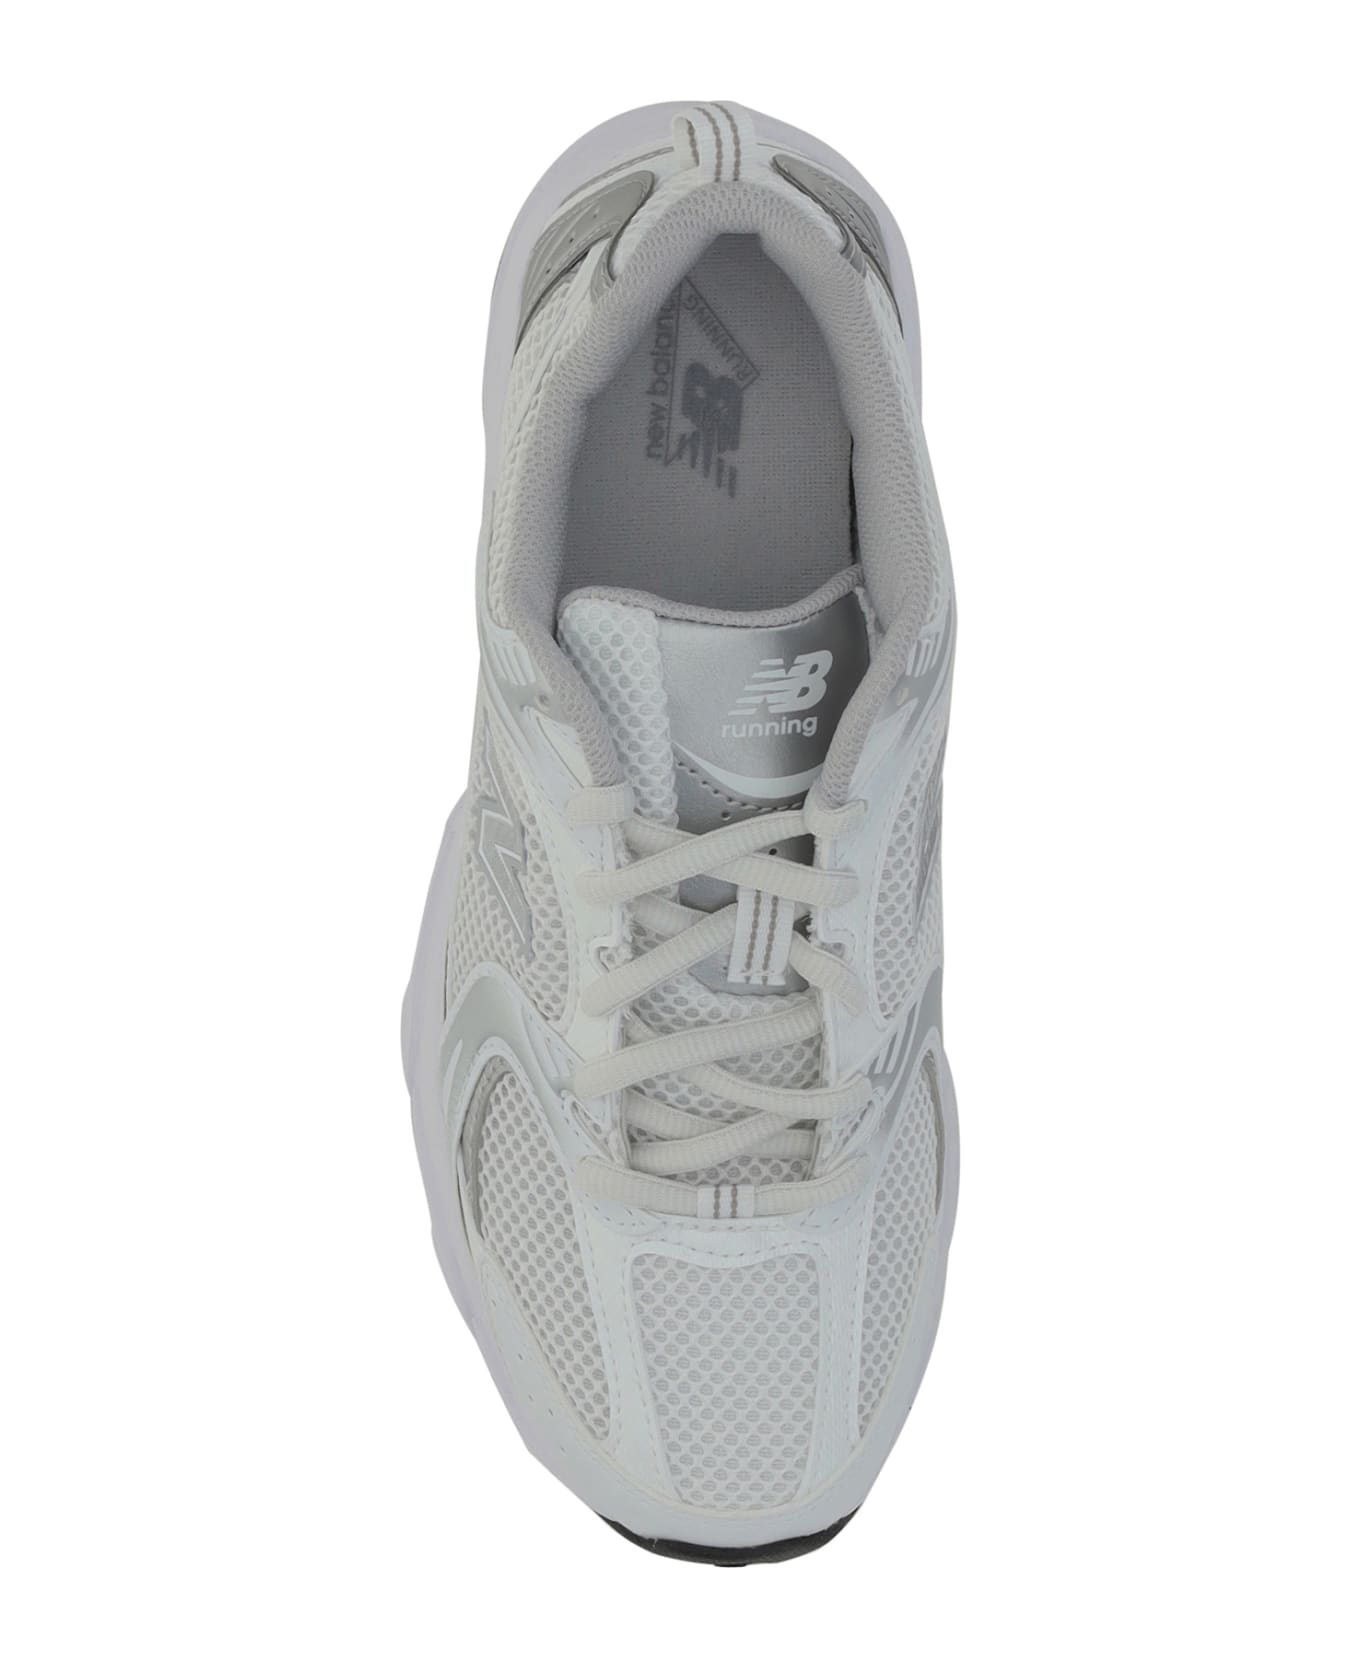 New Balance Lifestyle Sneakers - White/silver